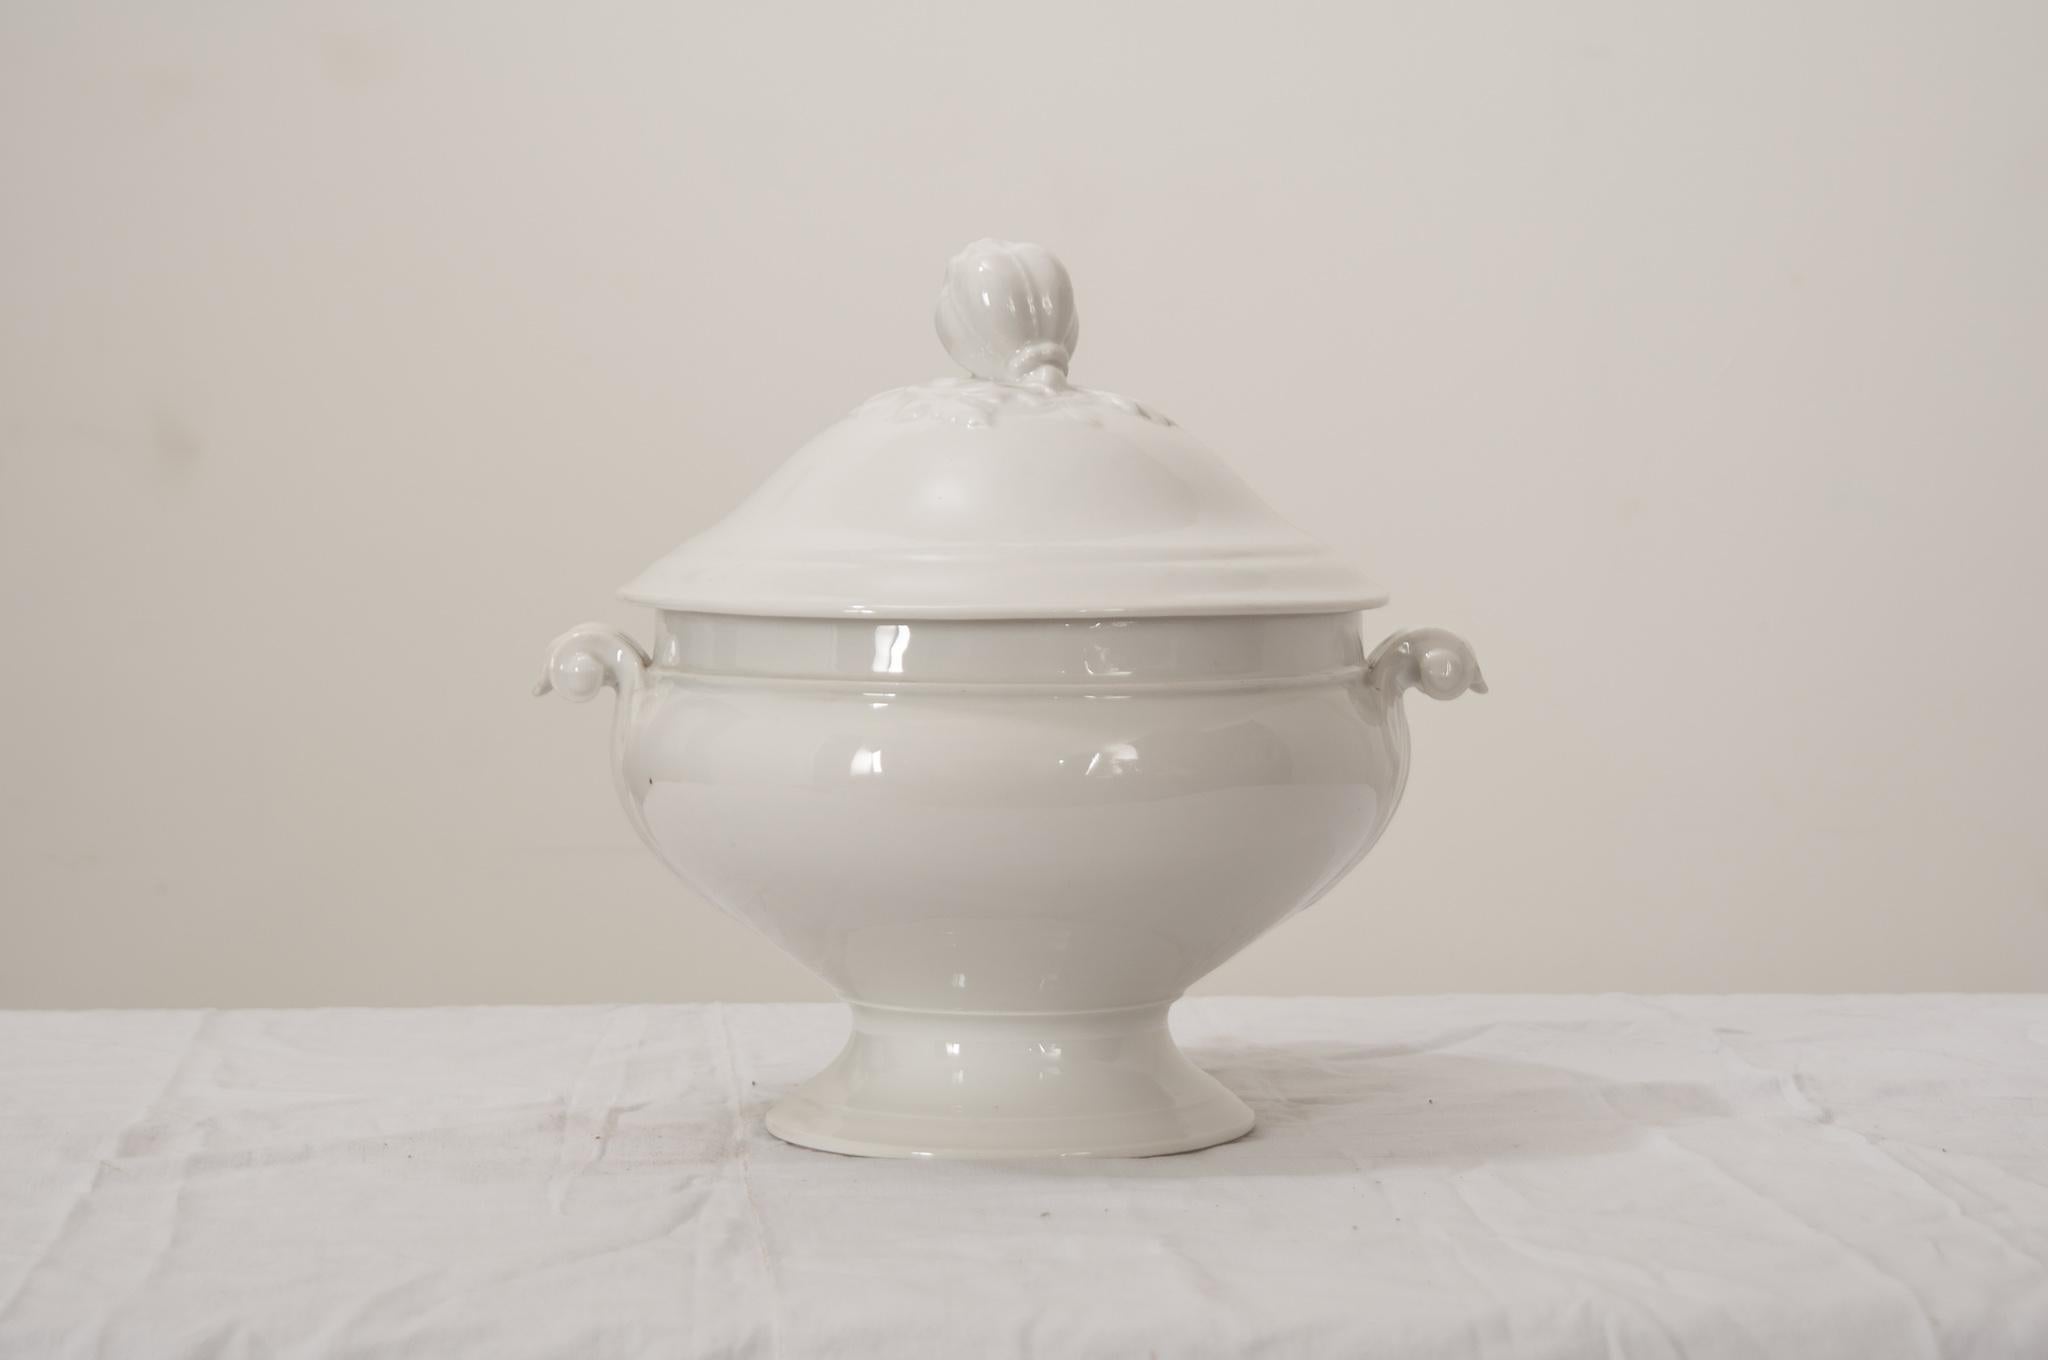 A gorgeous antique French white ironstone lidded soup tureen with pedestal base, perfect for serving soups, stews, and gumbos.This fine tureen has a stylized pomegranate finial on the lid with decorative grape leaves, scrolling acanthus leaf handles